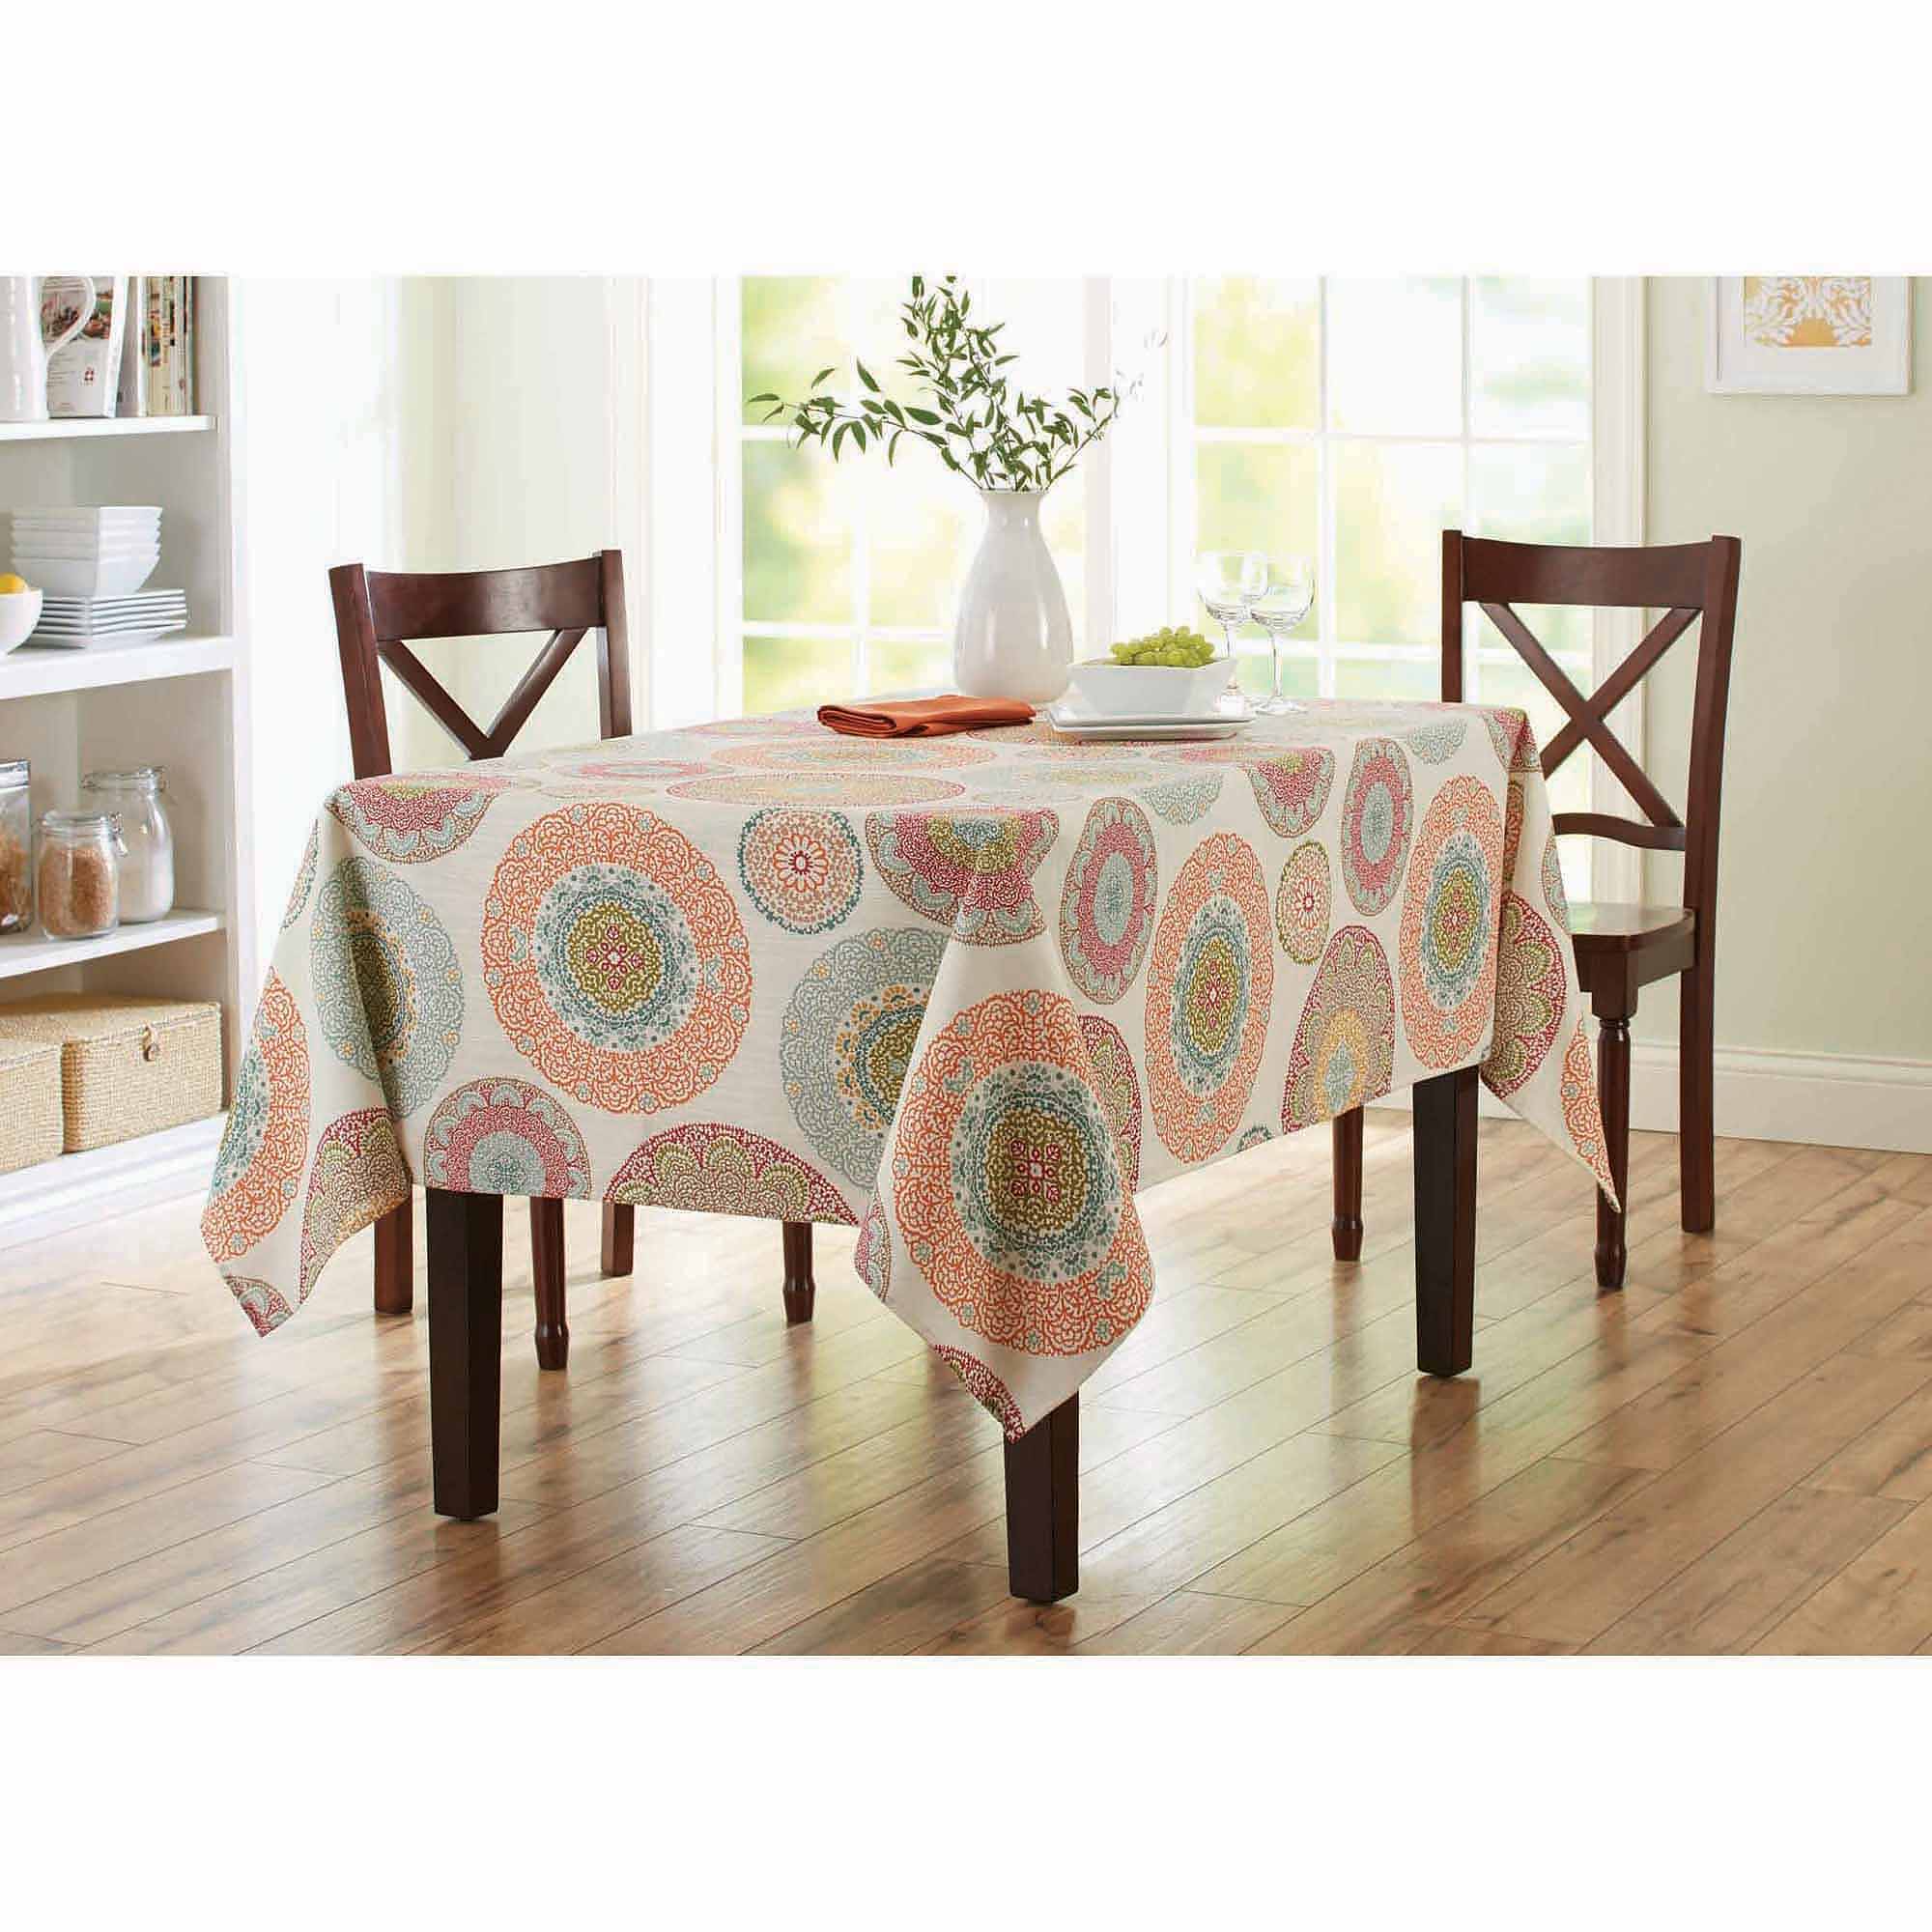 Better Homes & Gardens Lace Medallion Tablecloth - image 1 of 1